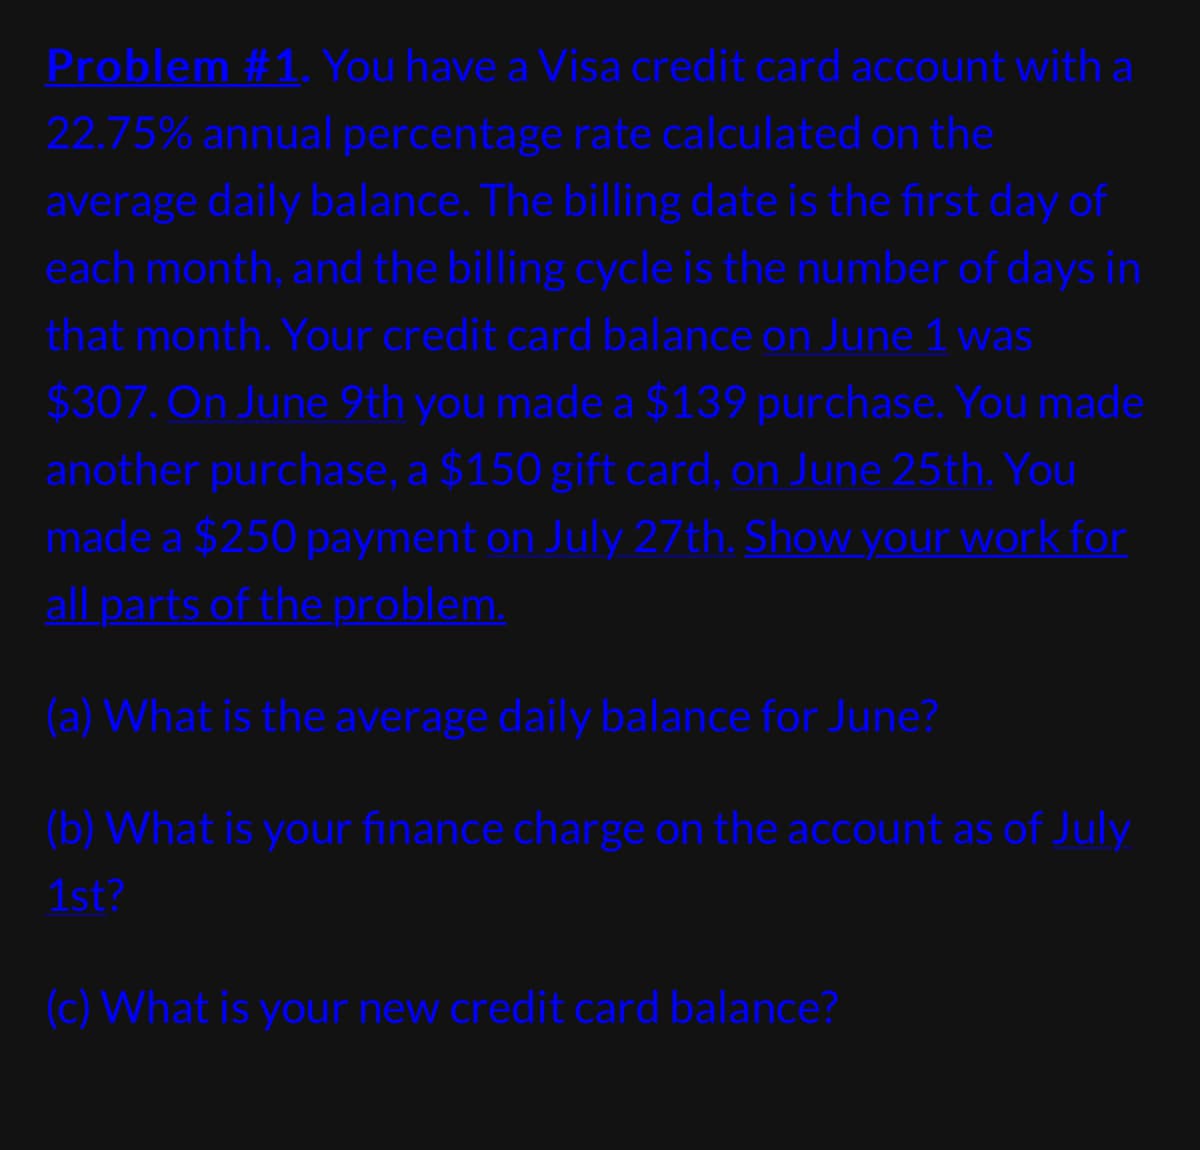 Problem #1. You have a Visa credit card account with a
22.75% annual percentage rate calculated on the
average daily balance. The billing date is the first day of
each month, and the billing cycle is the number of days in
that month. Your credit card balance on June 1 was
$307. On June 9th you made a $139 purchase. You made
another purchase, a $150 gift card, on June 25th. You
made a $250 payment on July 27th. Show your work for
all parts of the problem.
(a) What is the average daily balance for June?
(b) What is your finance charge on the account as of July
1st?
(c) What is your new credit card balance?